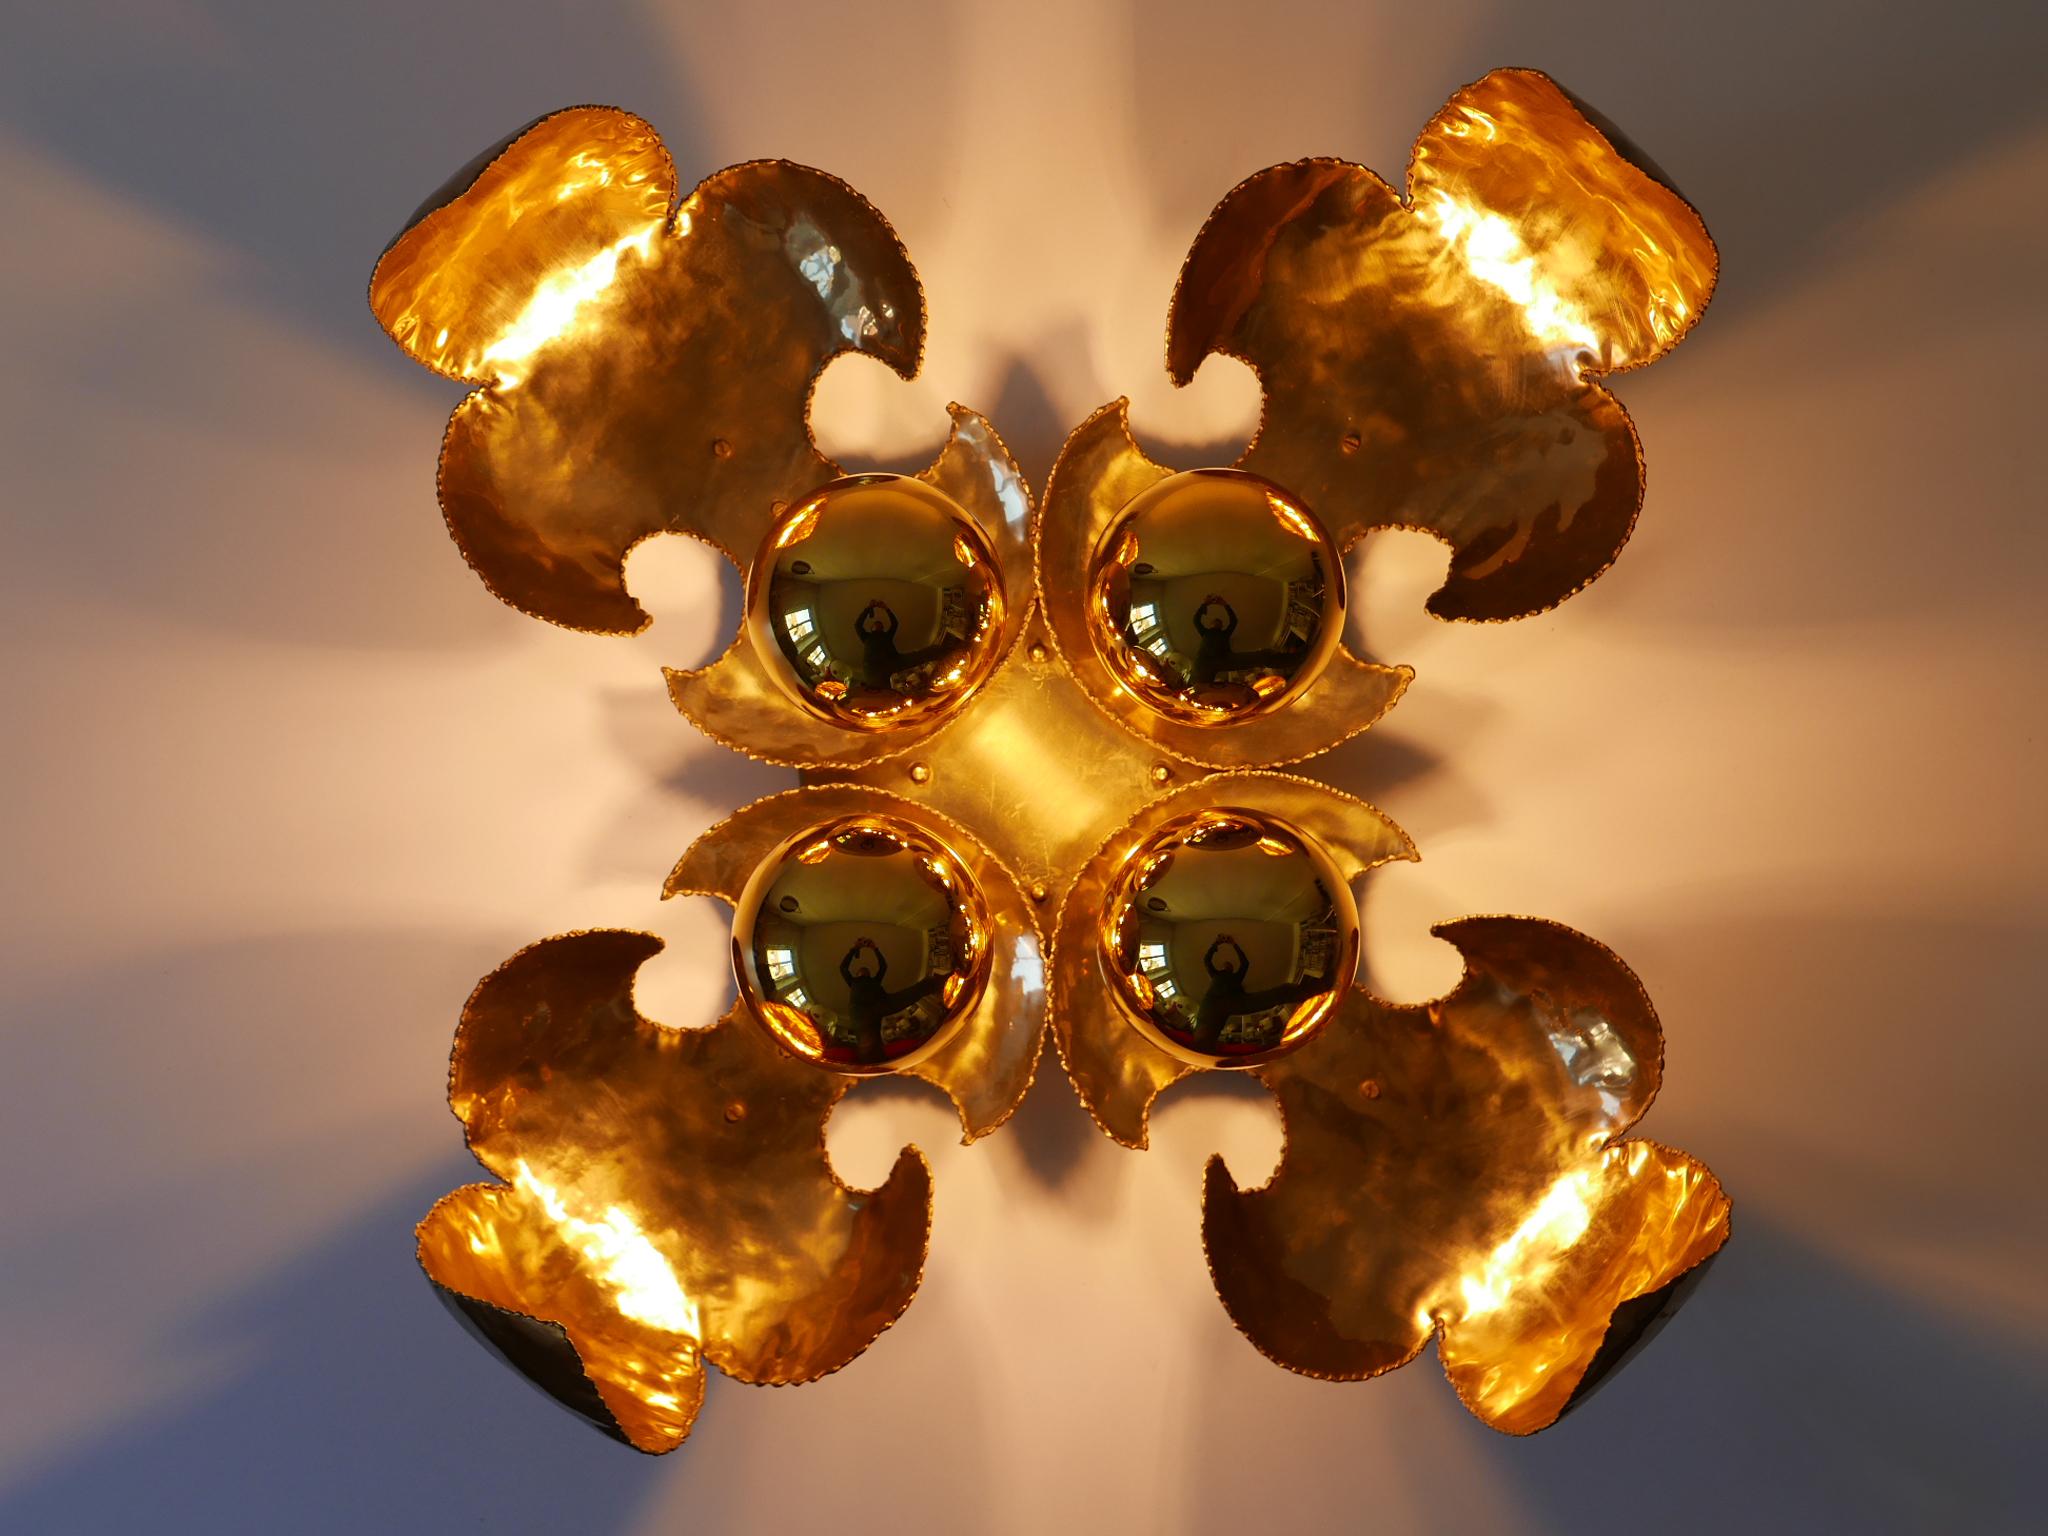 Extremely rare, large and highly decorative brutalist Mid-Century Modern brass sconces or ceiling fixtures. Designed & manufactured probably by Maison Jansen, France, 1960s.

A total of four identical sconces / ceiling fixtures available. Price per